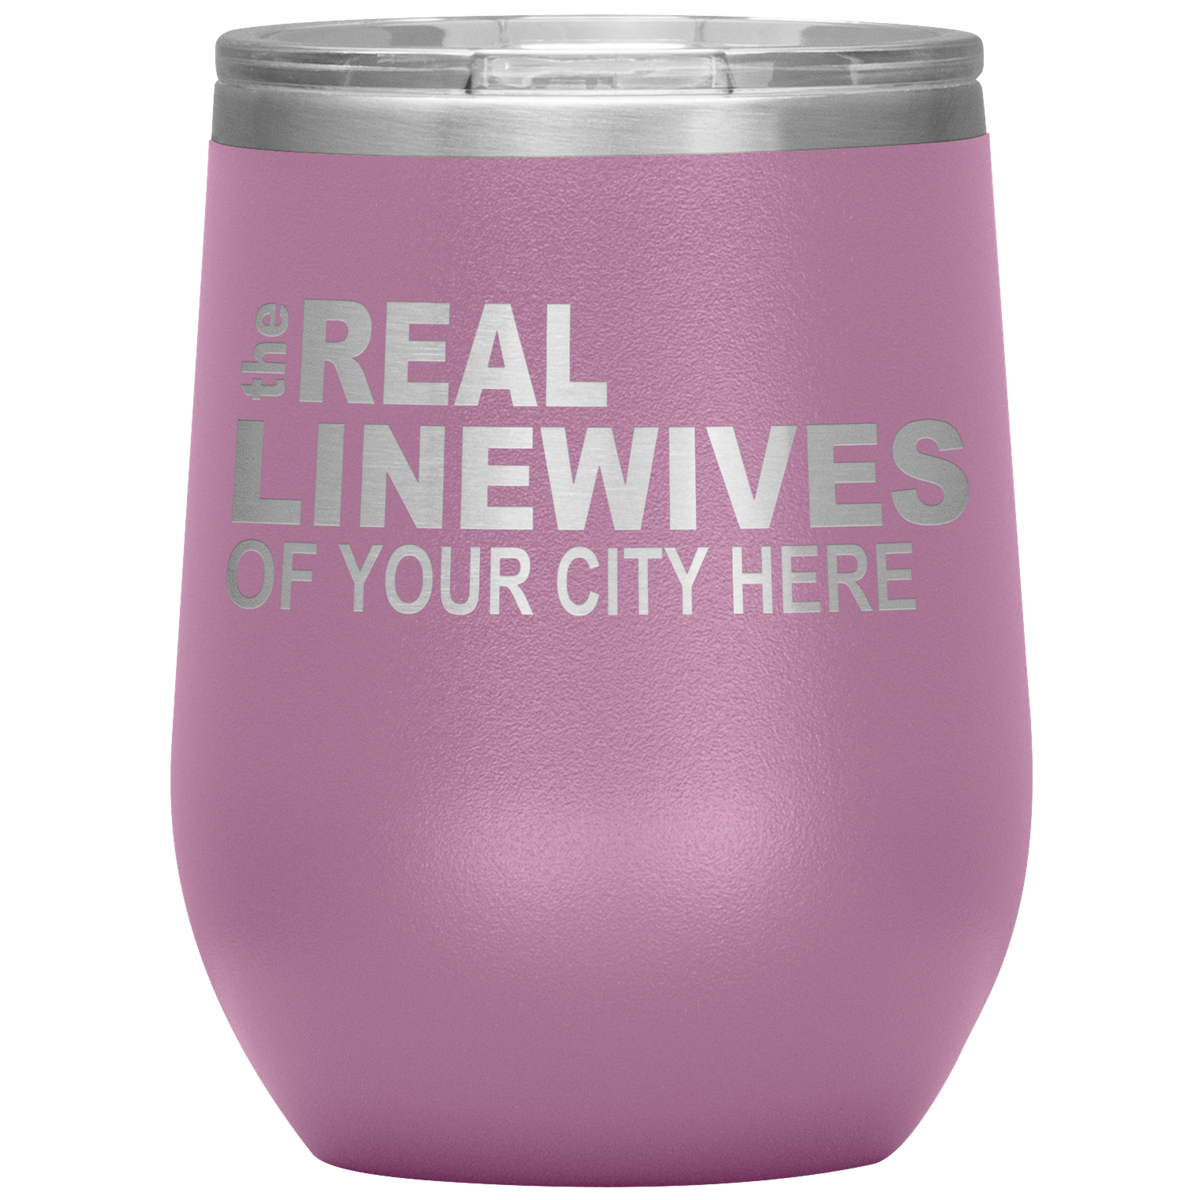 The Real Linewives of Your City Free Shipping